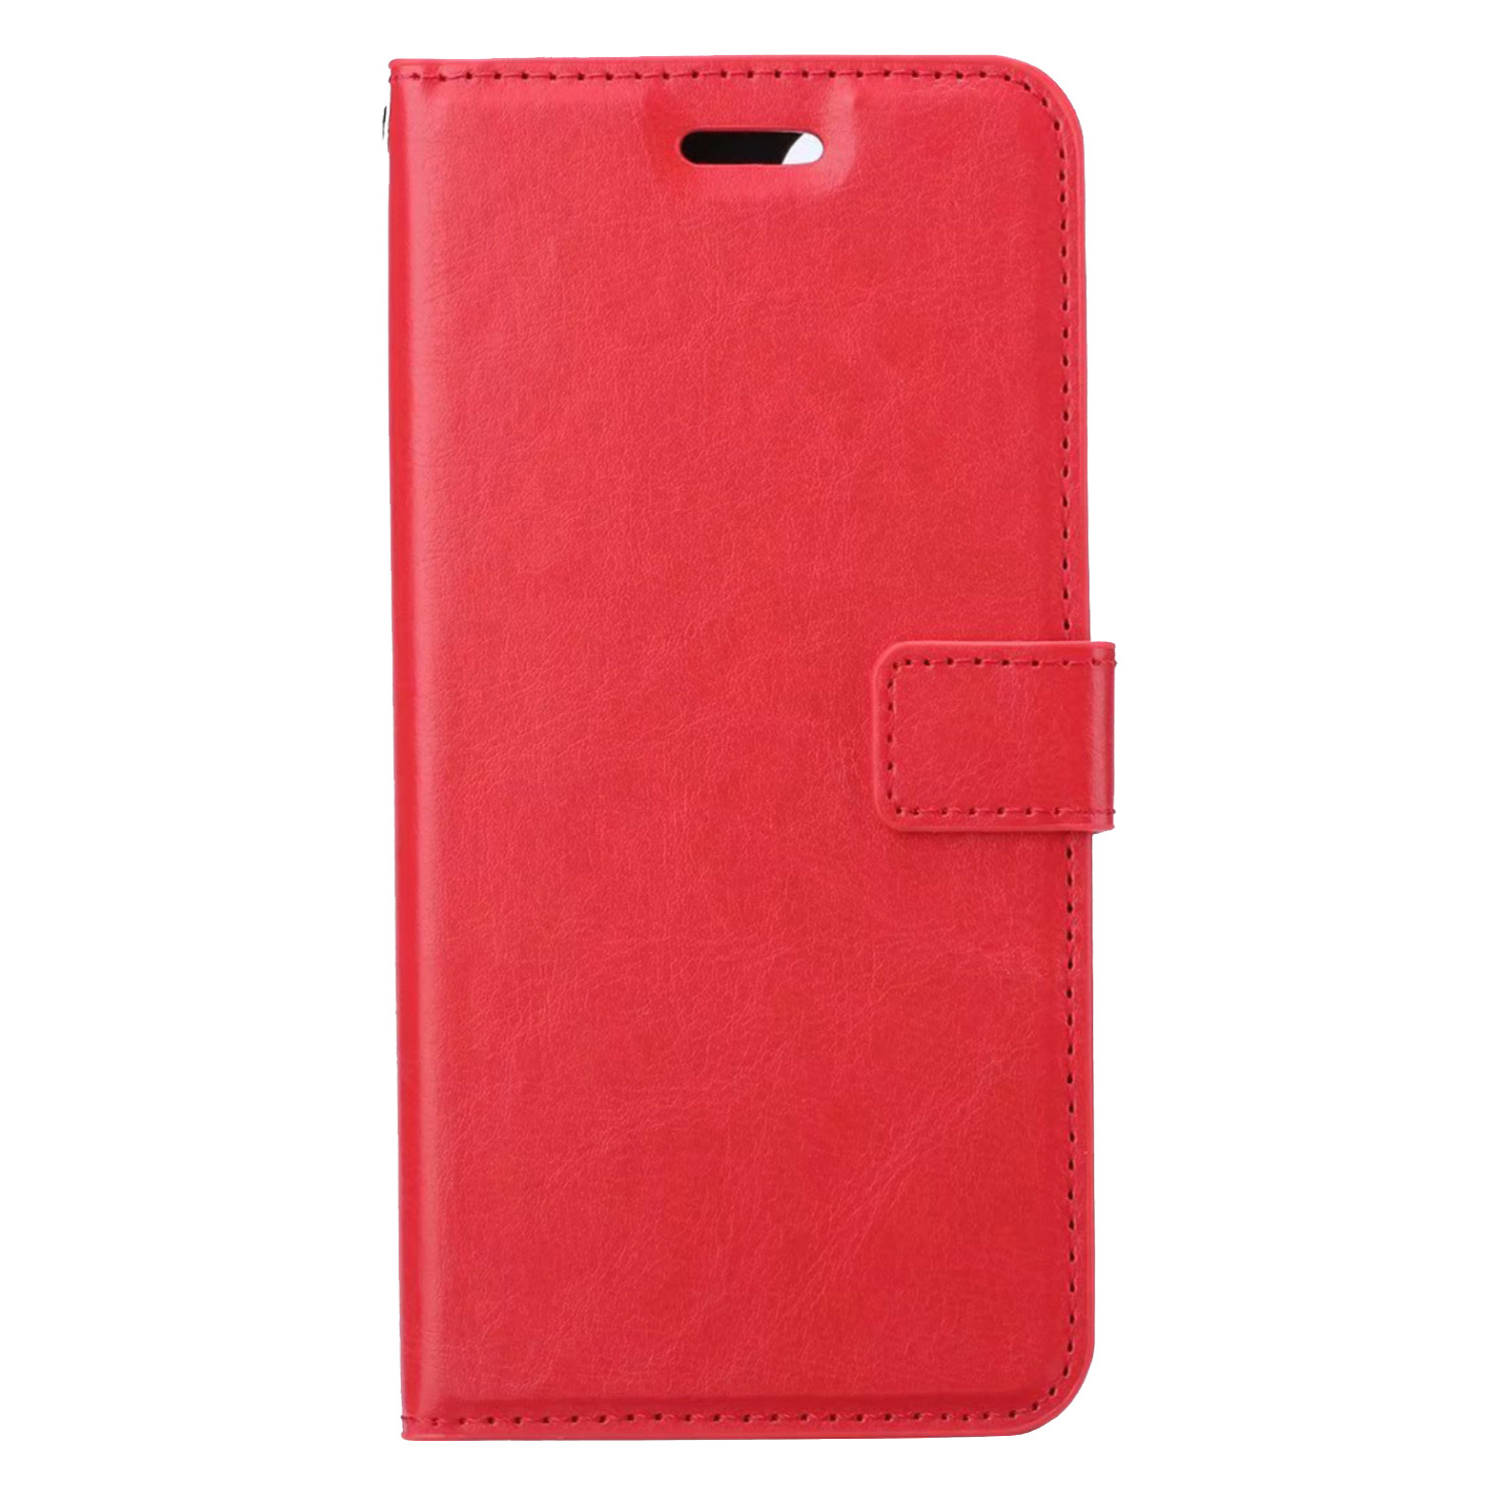 Basey Hoes voor iPhone 14 Hoesje Bookcase Hoes Flip Case Book Cover - Hoes voor iPhone 14 Hoes Book Case Hoesje - Rood